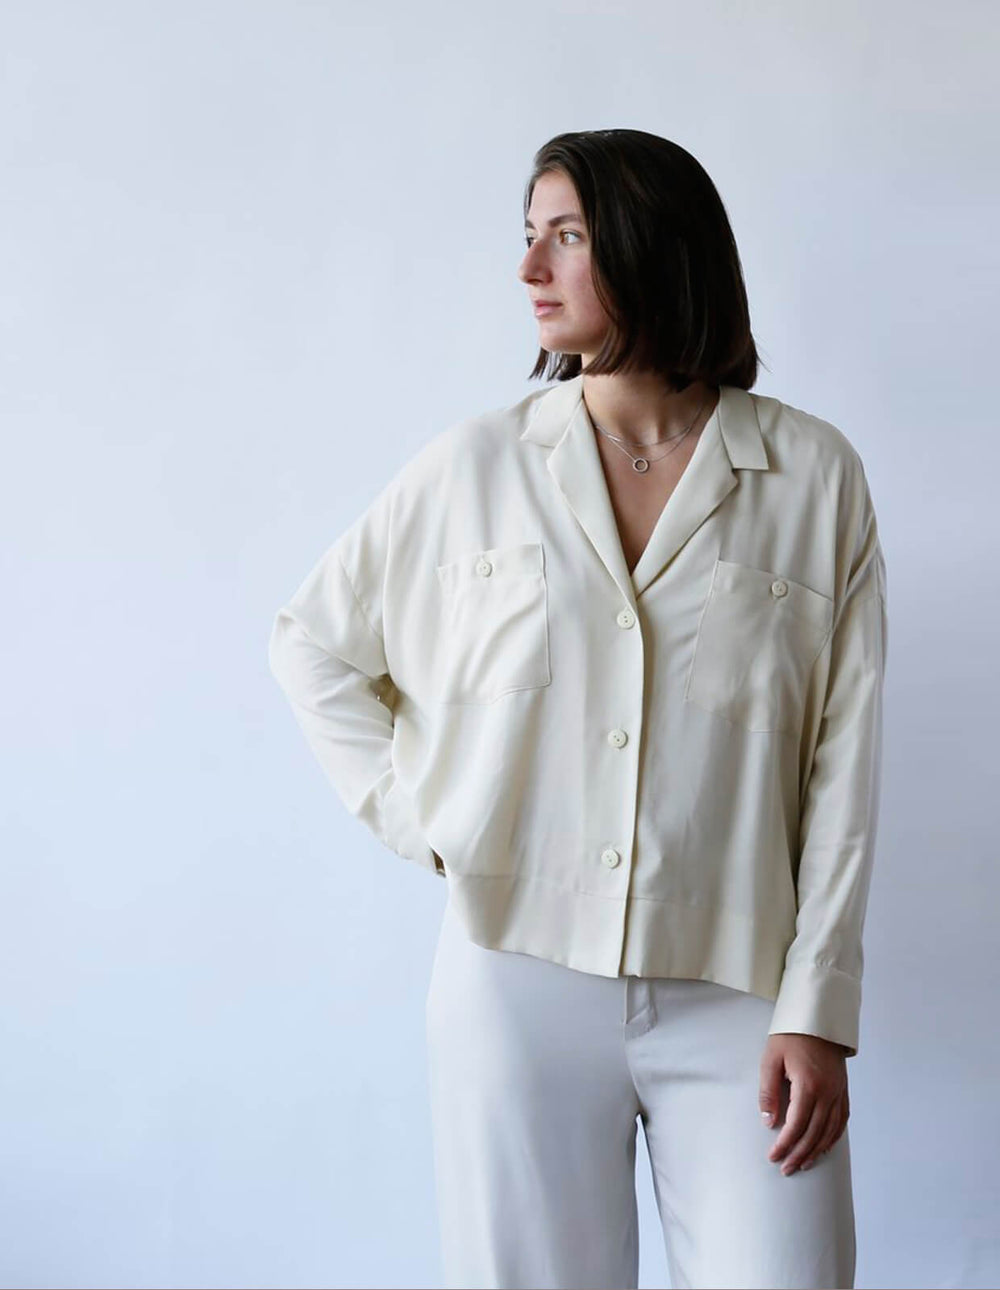 Woman wearing the Lounge Shirt sewing pattern from The Maker's Atelier on The Fold Line. A shirt pattern made in tana Lawn, cotton, linen, viscose or tencel fabrics, featuring an oversized fit, full length sleeves with loose cuffs, collar, front button cl